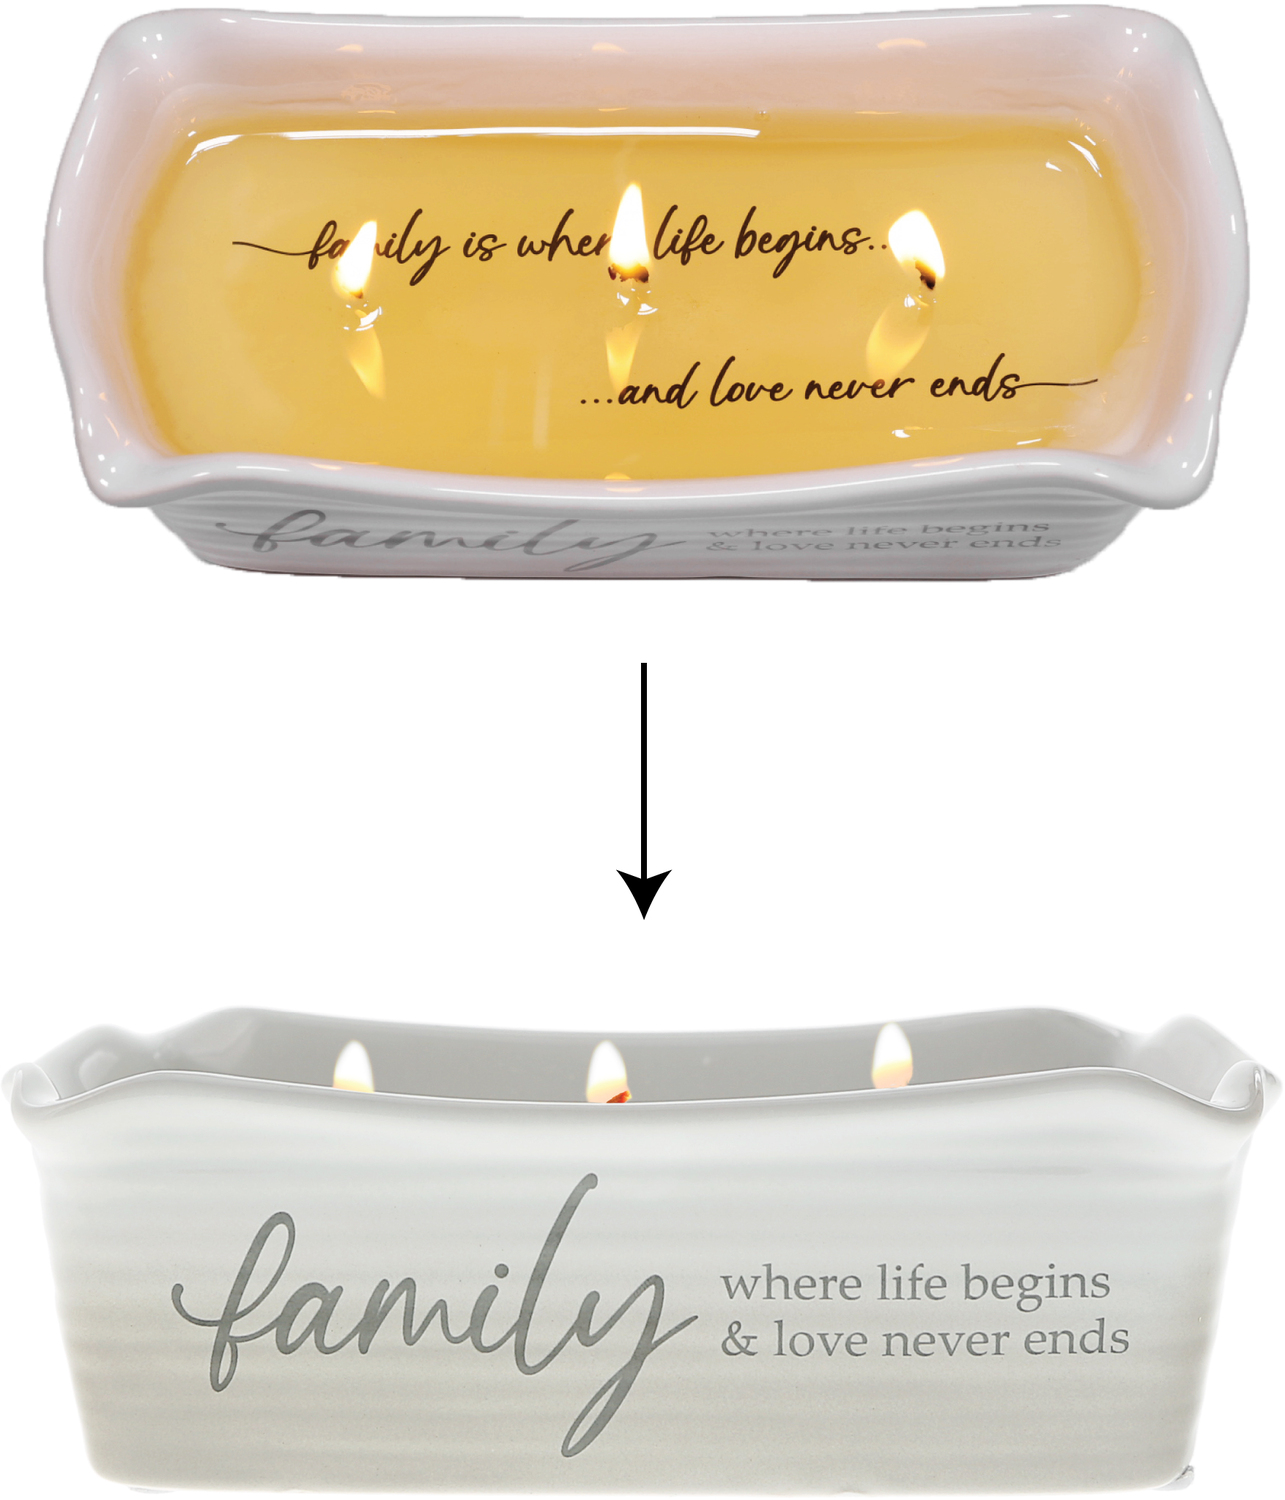 Family by Thoughts of Home - Family - 12 oz - 100% Soy Wax Reveal Triple Wick Candle Scent: Tranquility